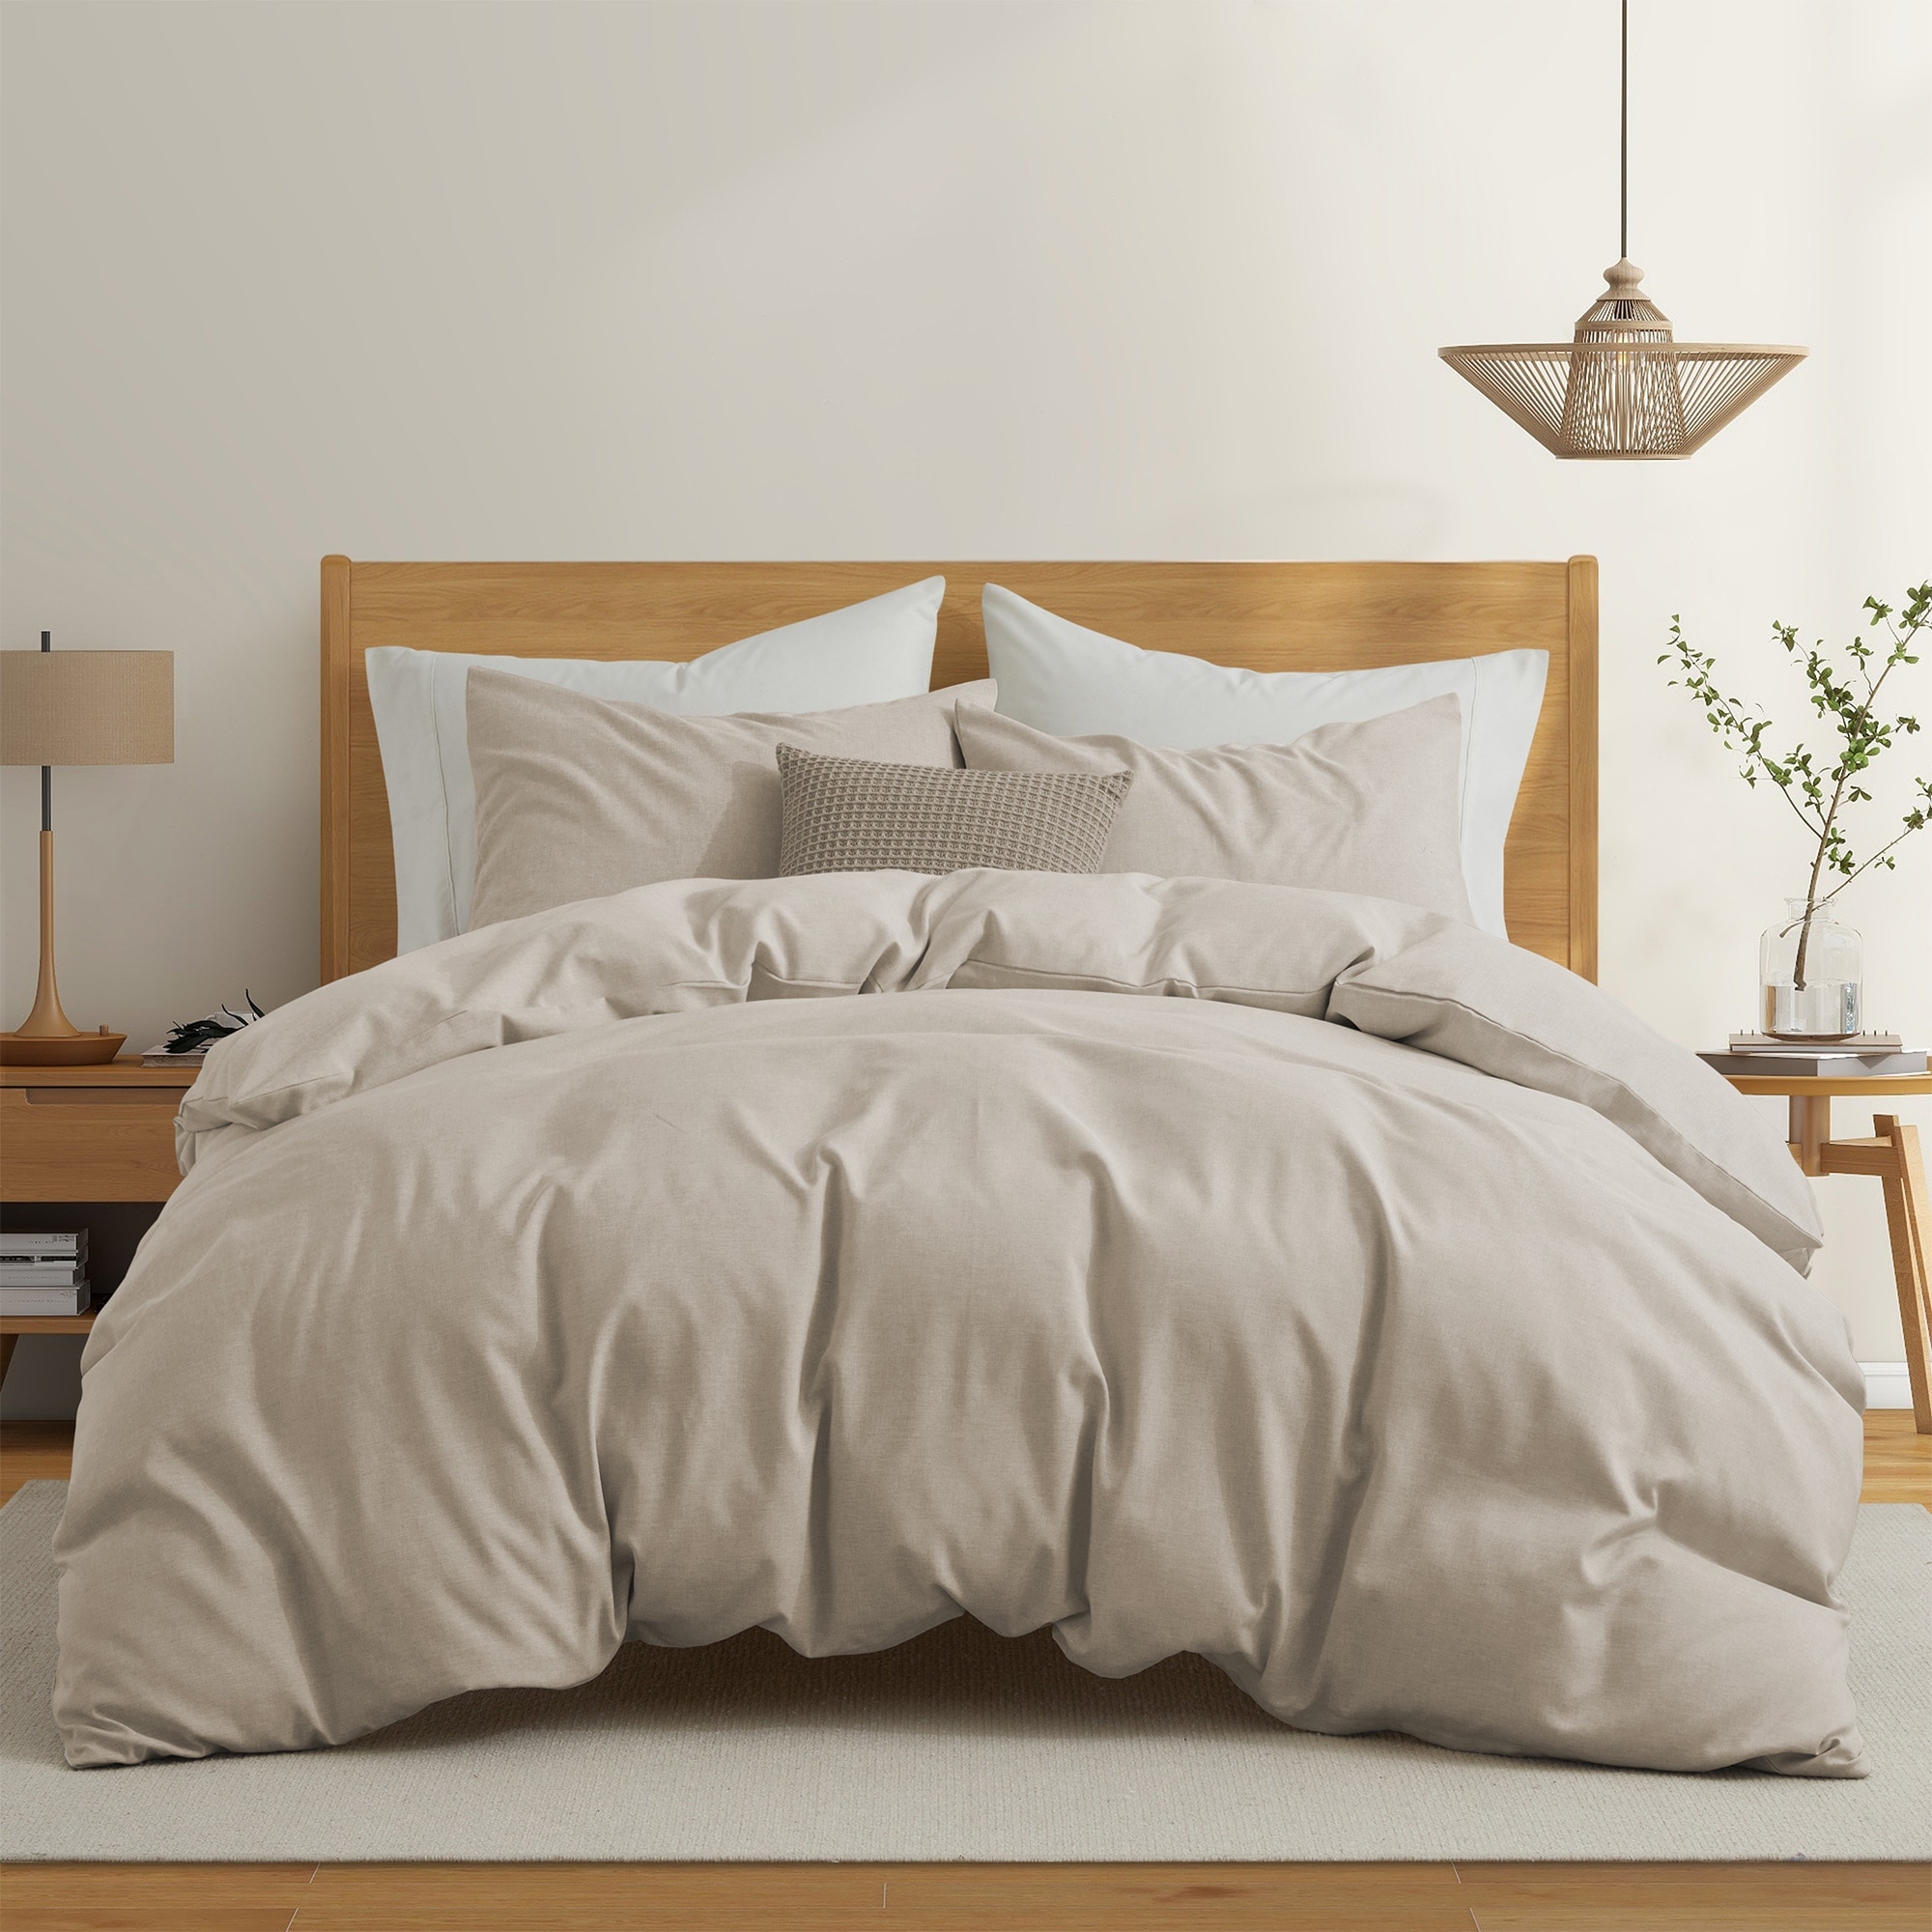 Linen Duvet Covers and Sets - Bed Bath & Beyond